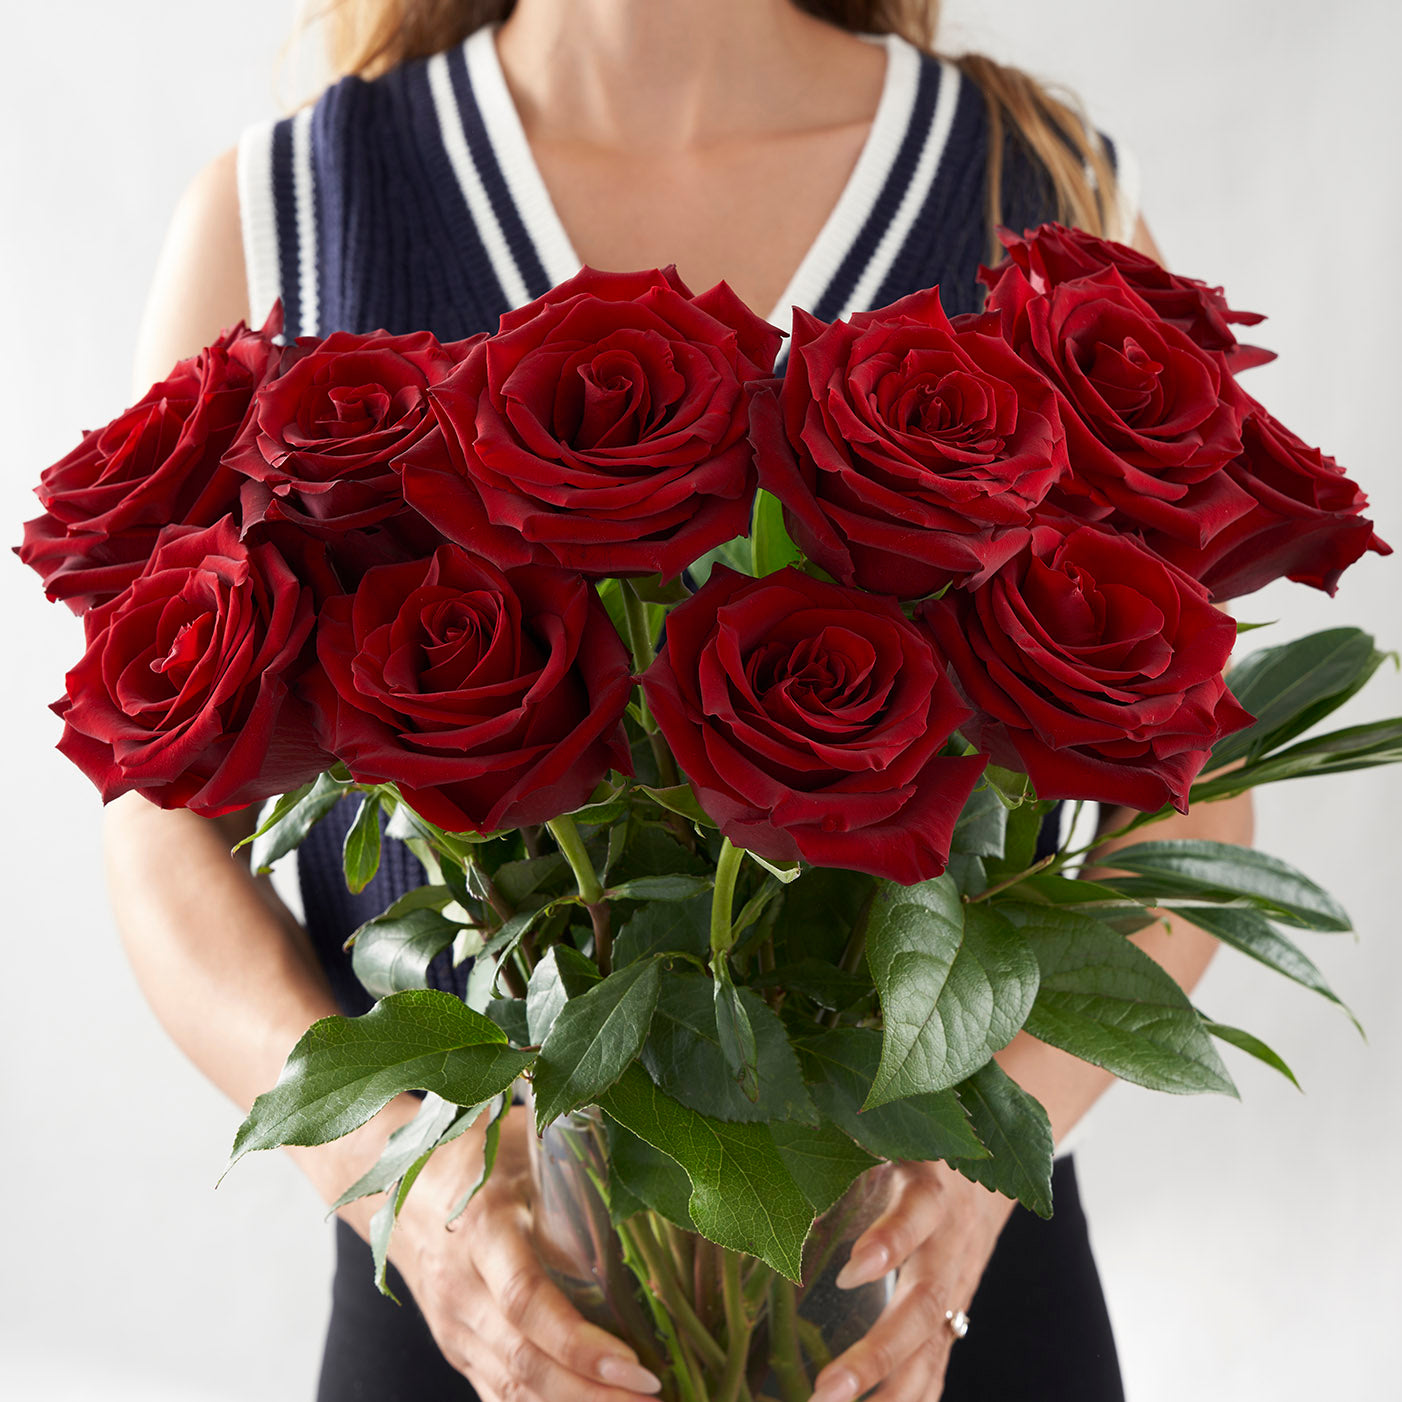 Woman holding vase full of red roses.